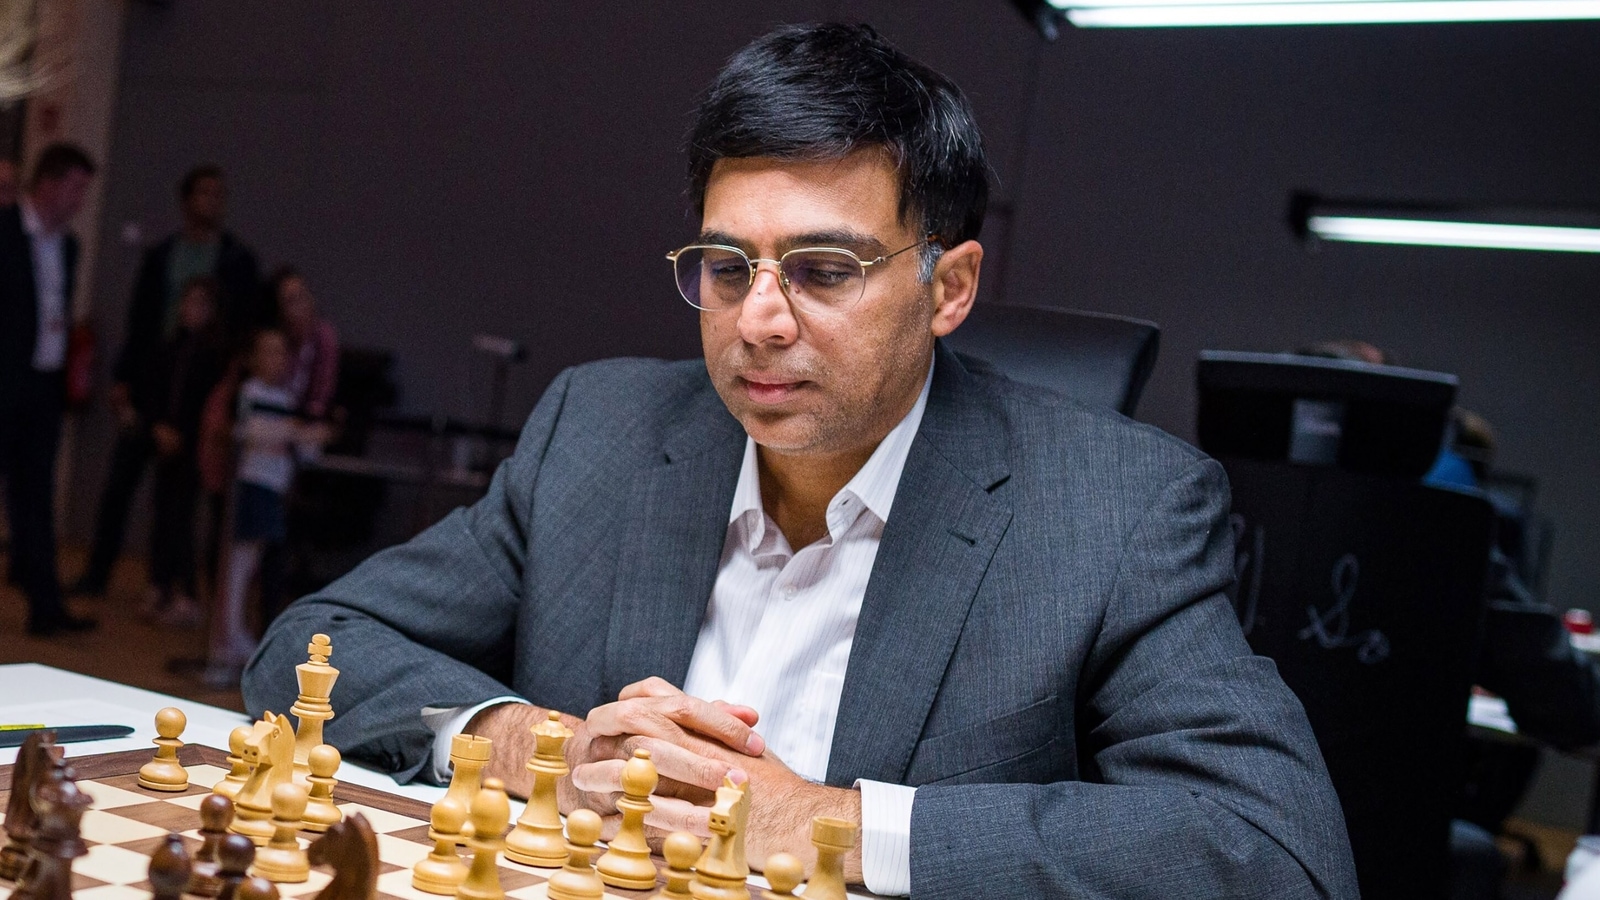 'We have good teams, hope we win some medals,' says Anand